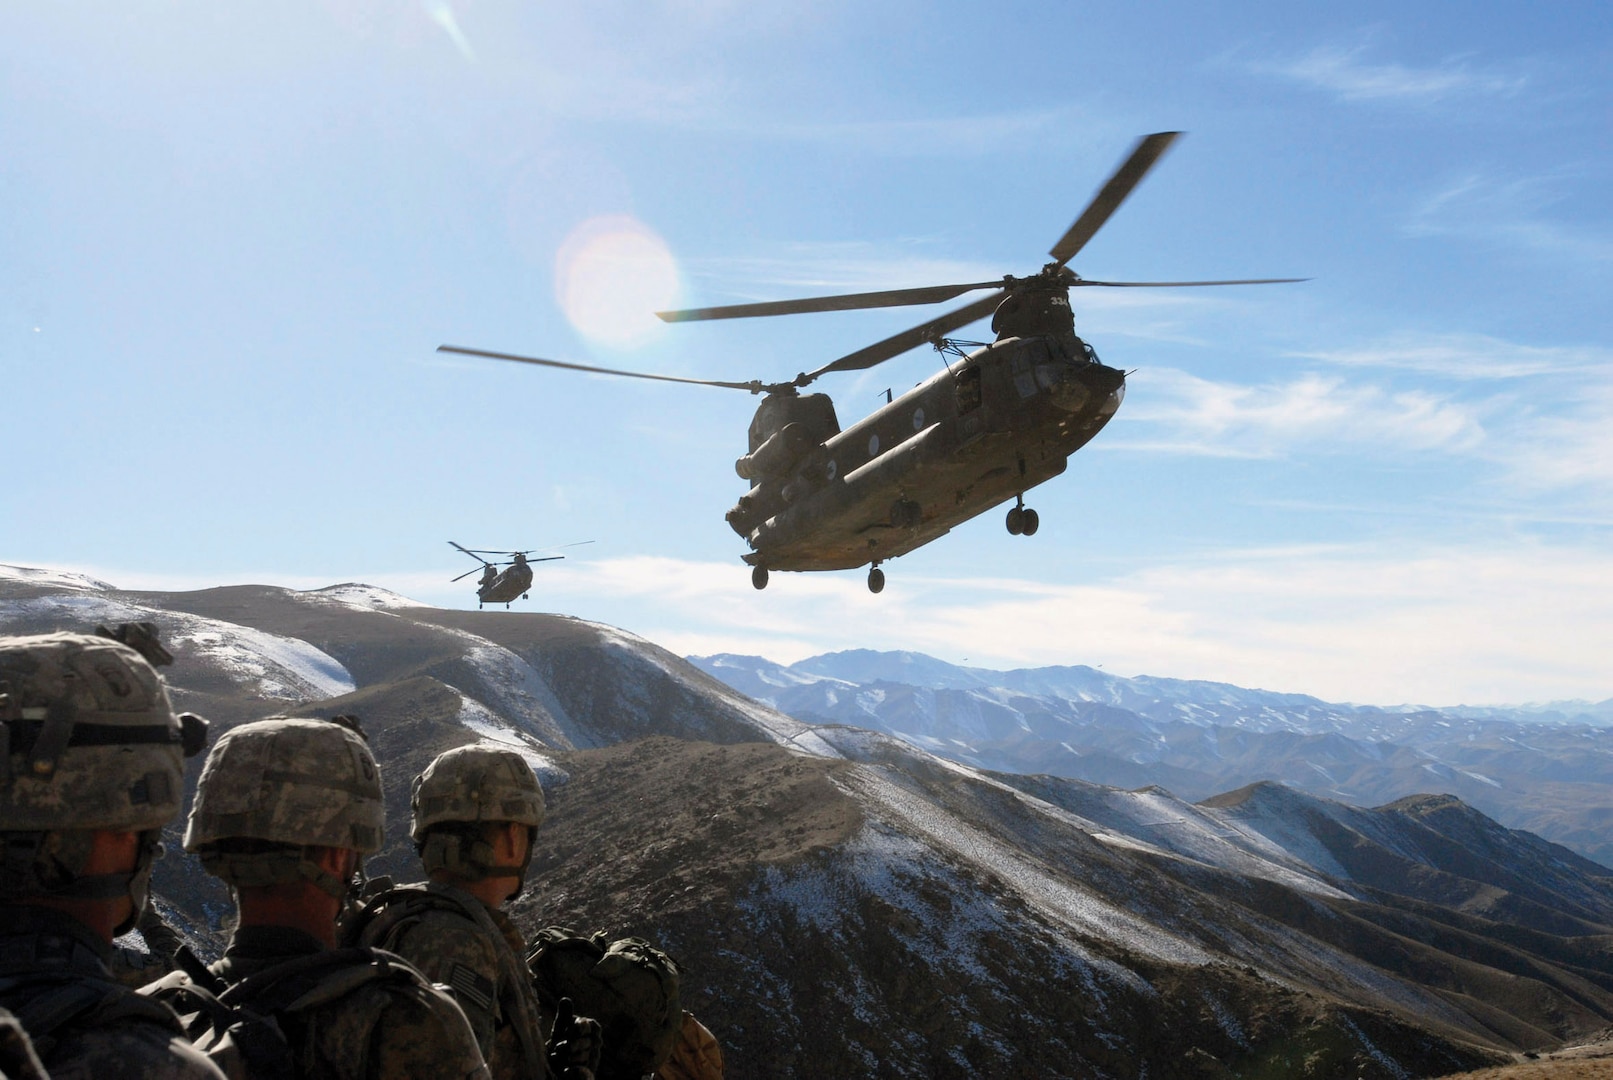 Soldiers with 101st Division Special Troops Battalion, 101st Airborne Division, watch as two Chinook helicopters fly in to return them to Bagram Airfield, Afghanistan, November 4, 2008 (U.S. Army/Mary L. Gonzalez)